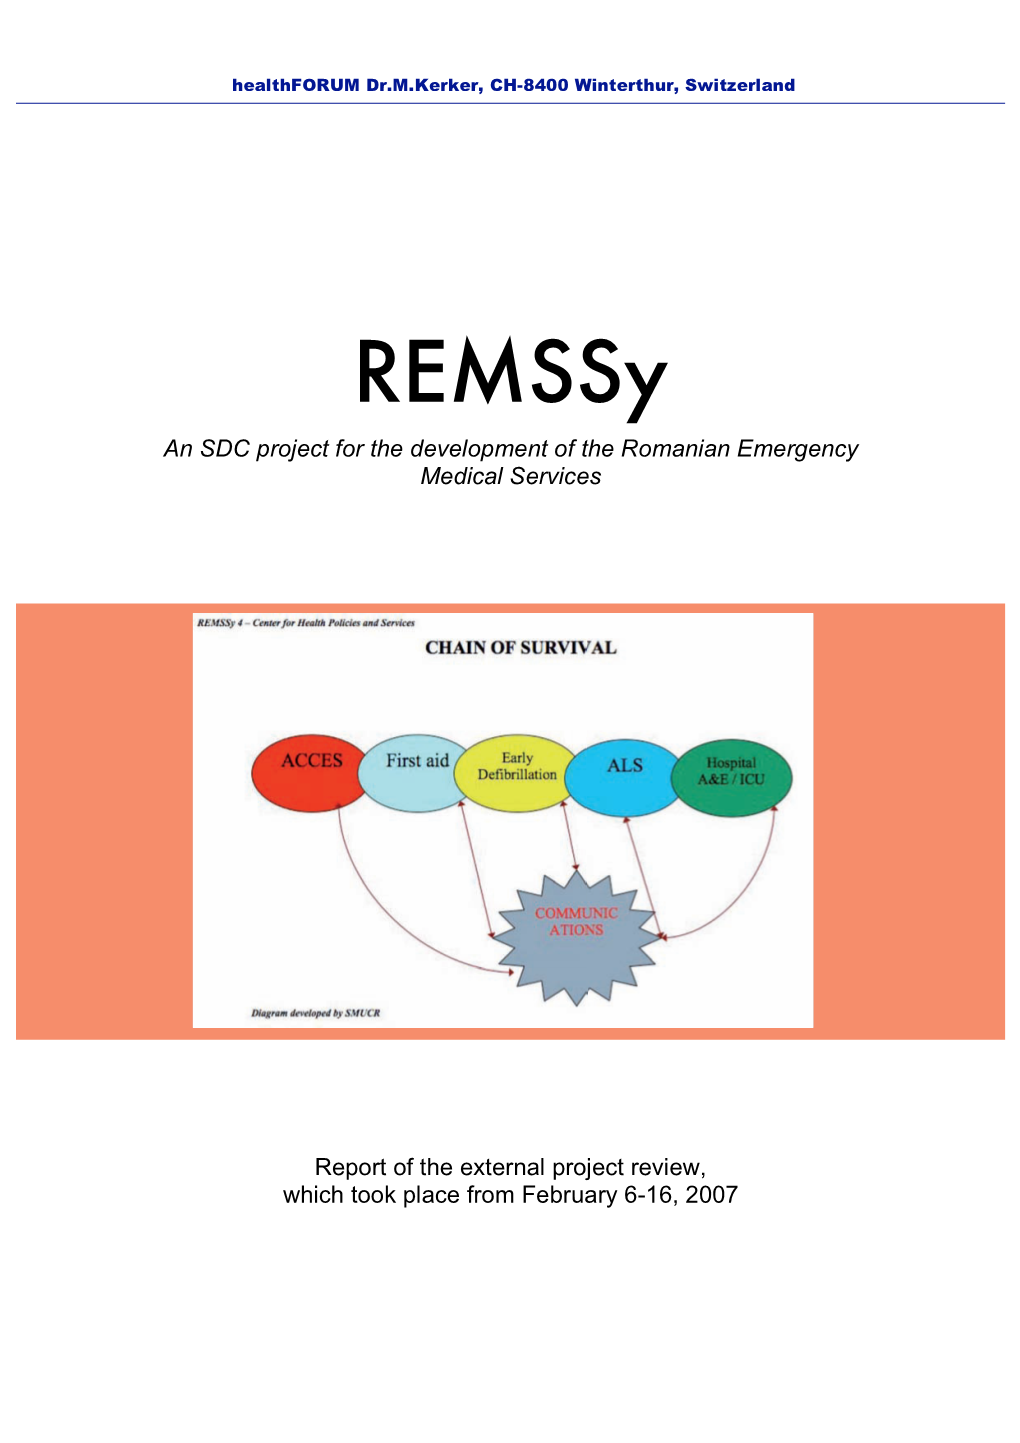 Remssy an SDC Project for the Development of the Romanian Emergency Medical Services